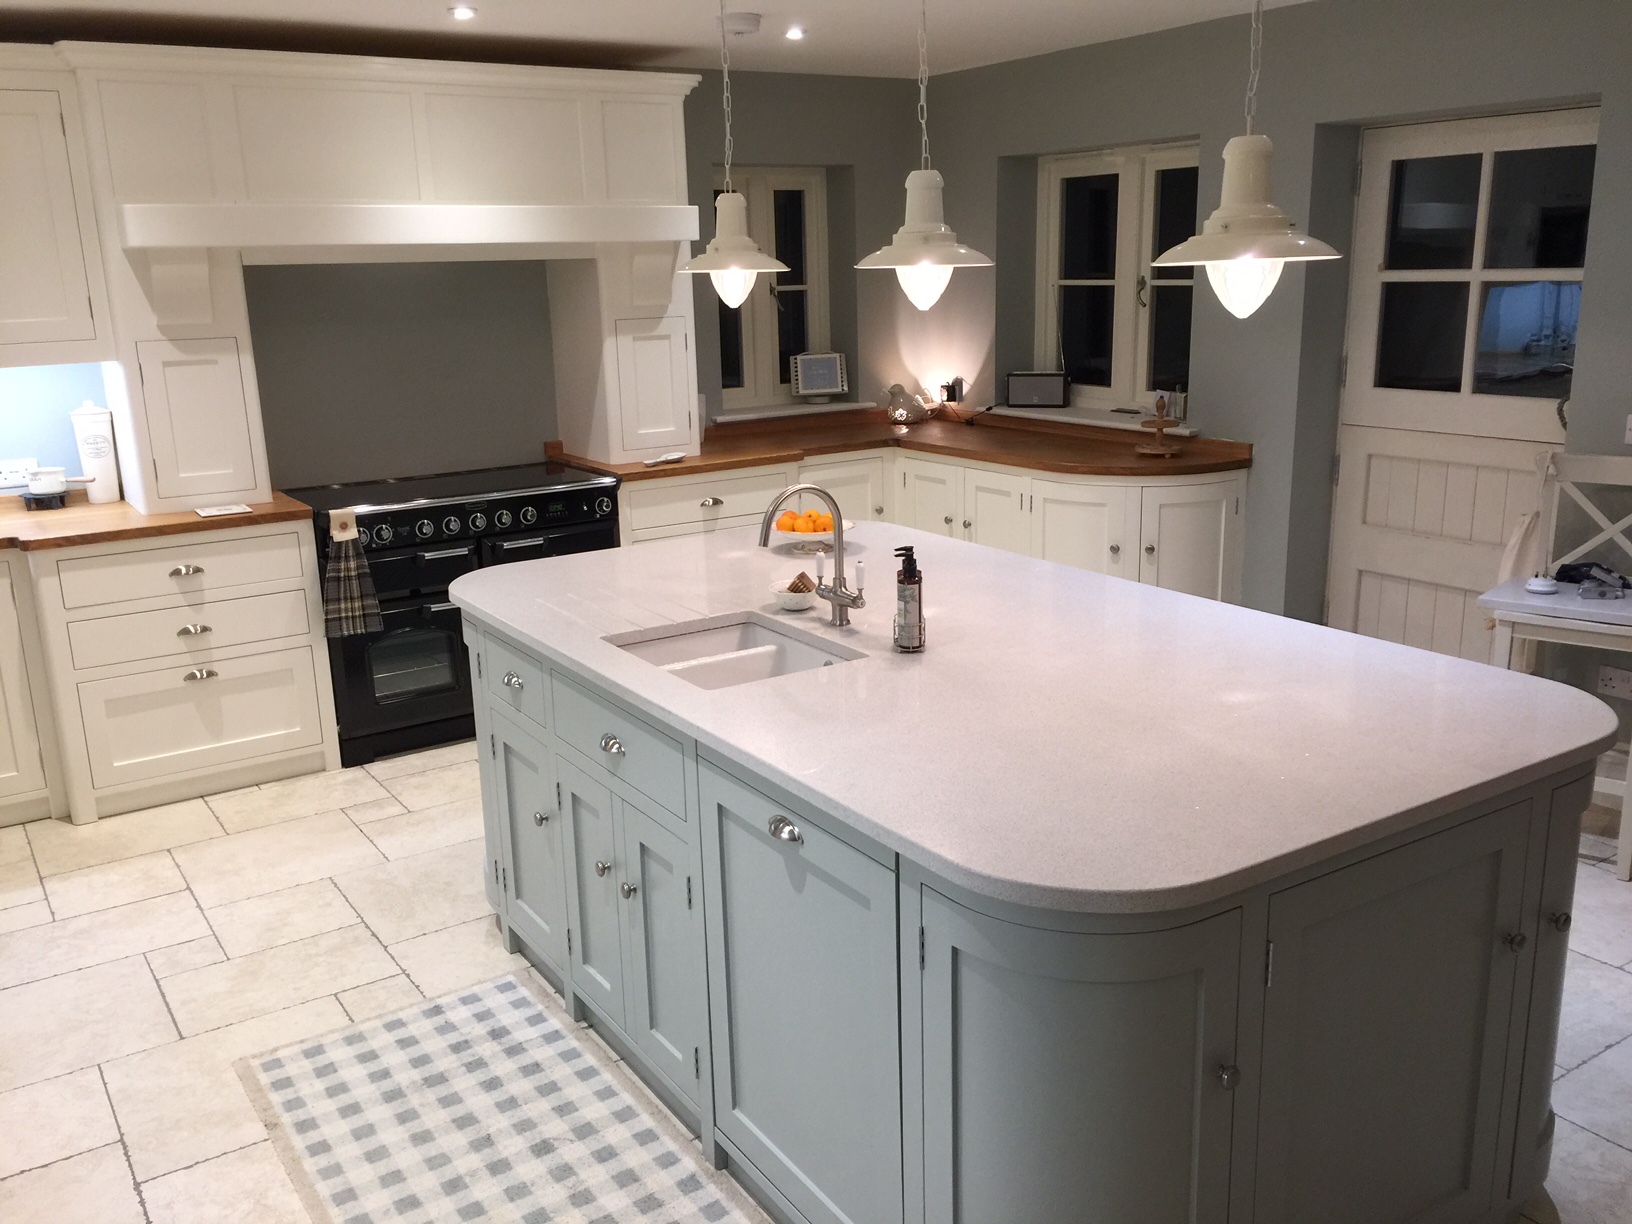 Fully bespoke shaker style kitchen hand built from solid wood finished in Farrow & ball pointing.